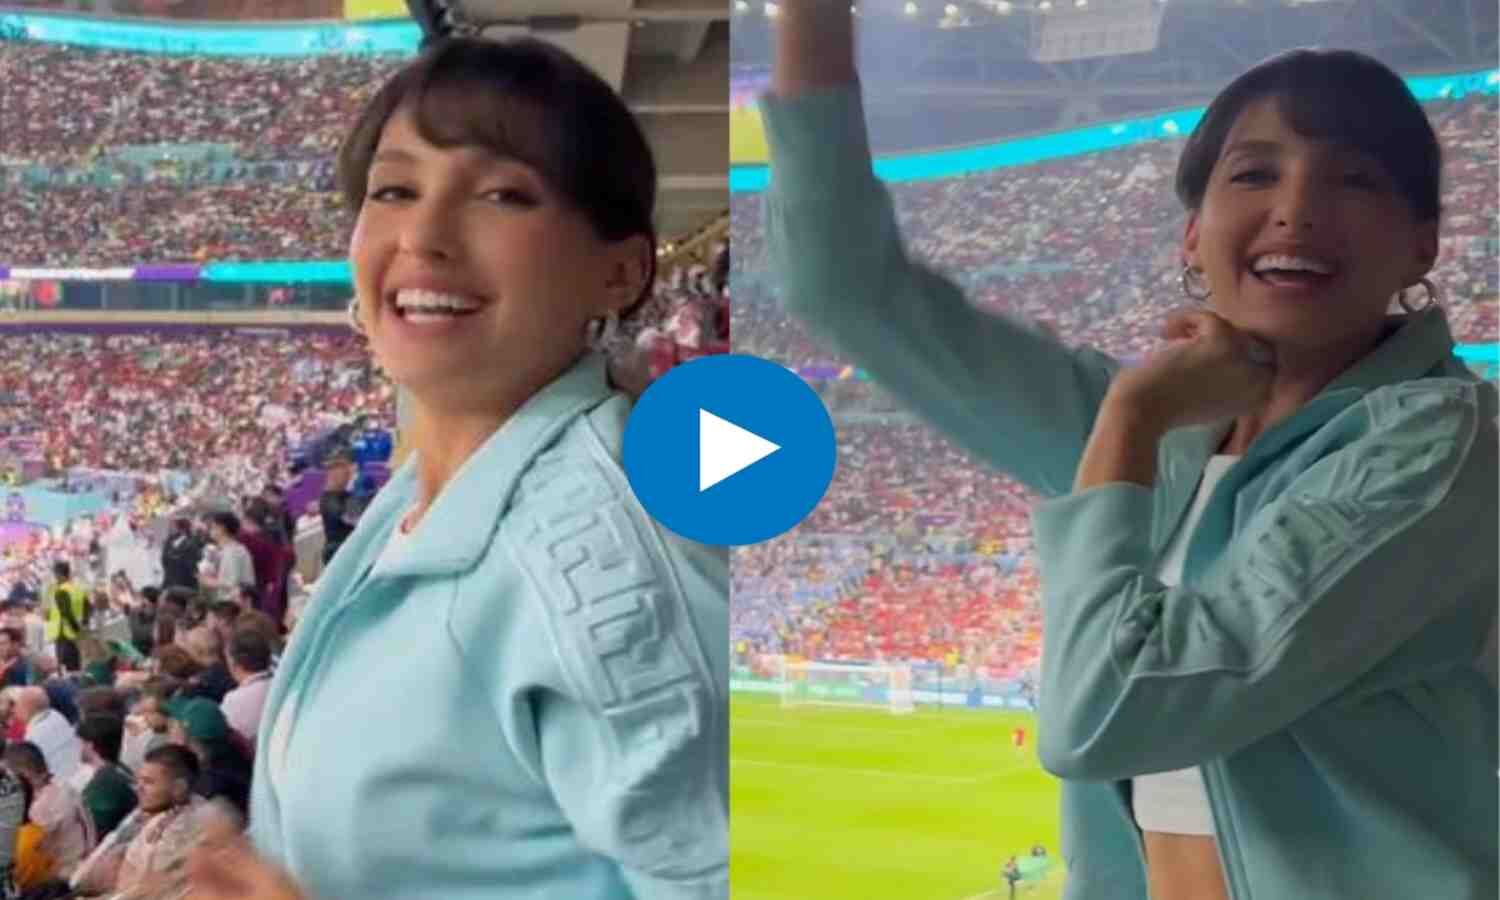 Nora Fatehi Video: Nora Fatehi did a great dance, the actress reacted after hearing her voice in the stadium